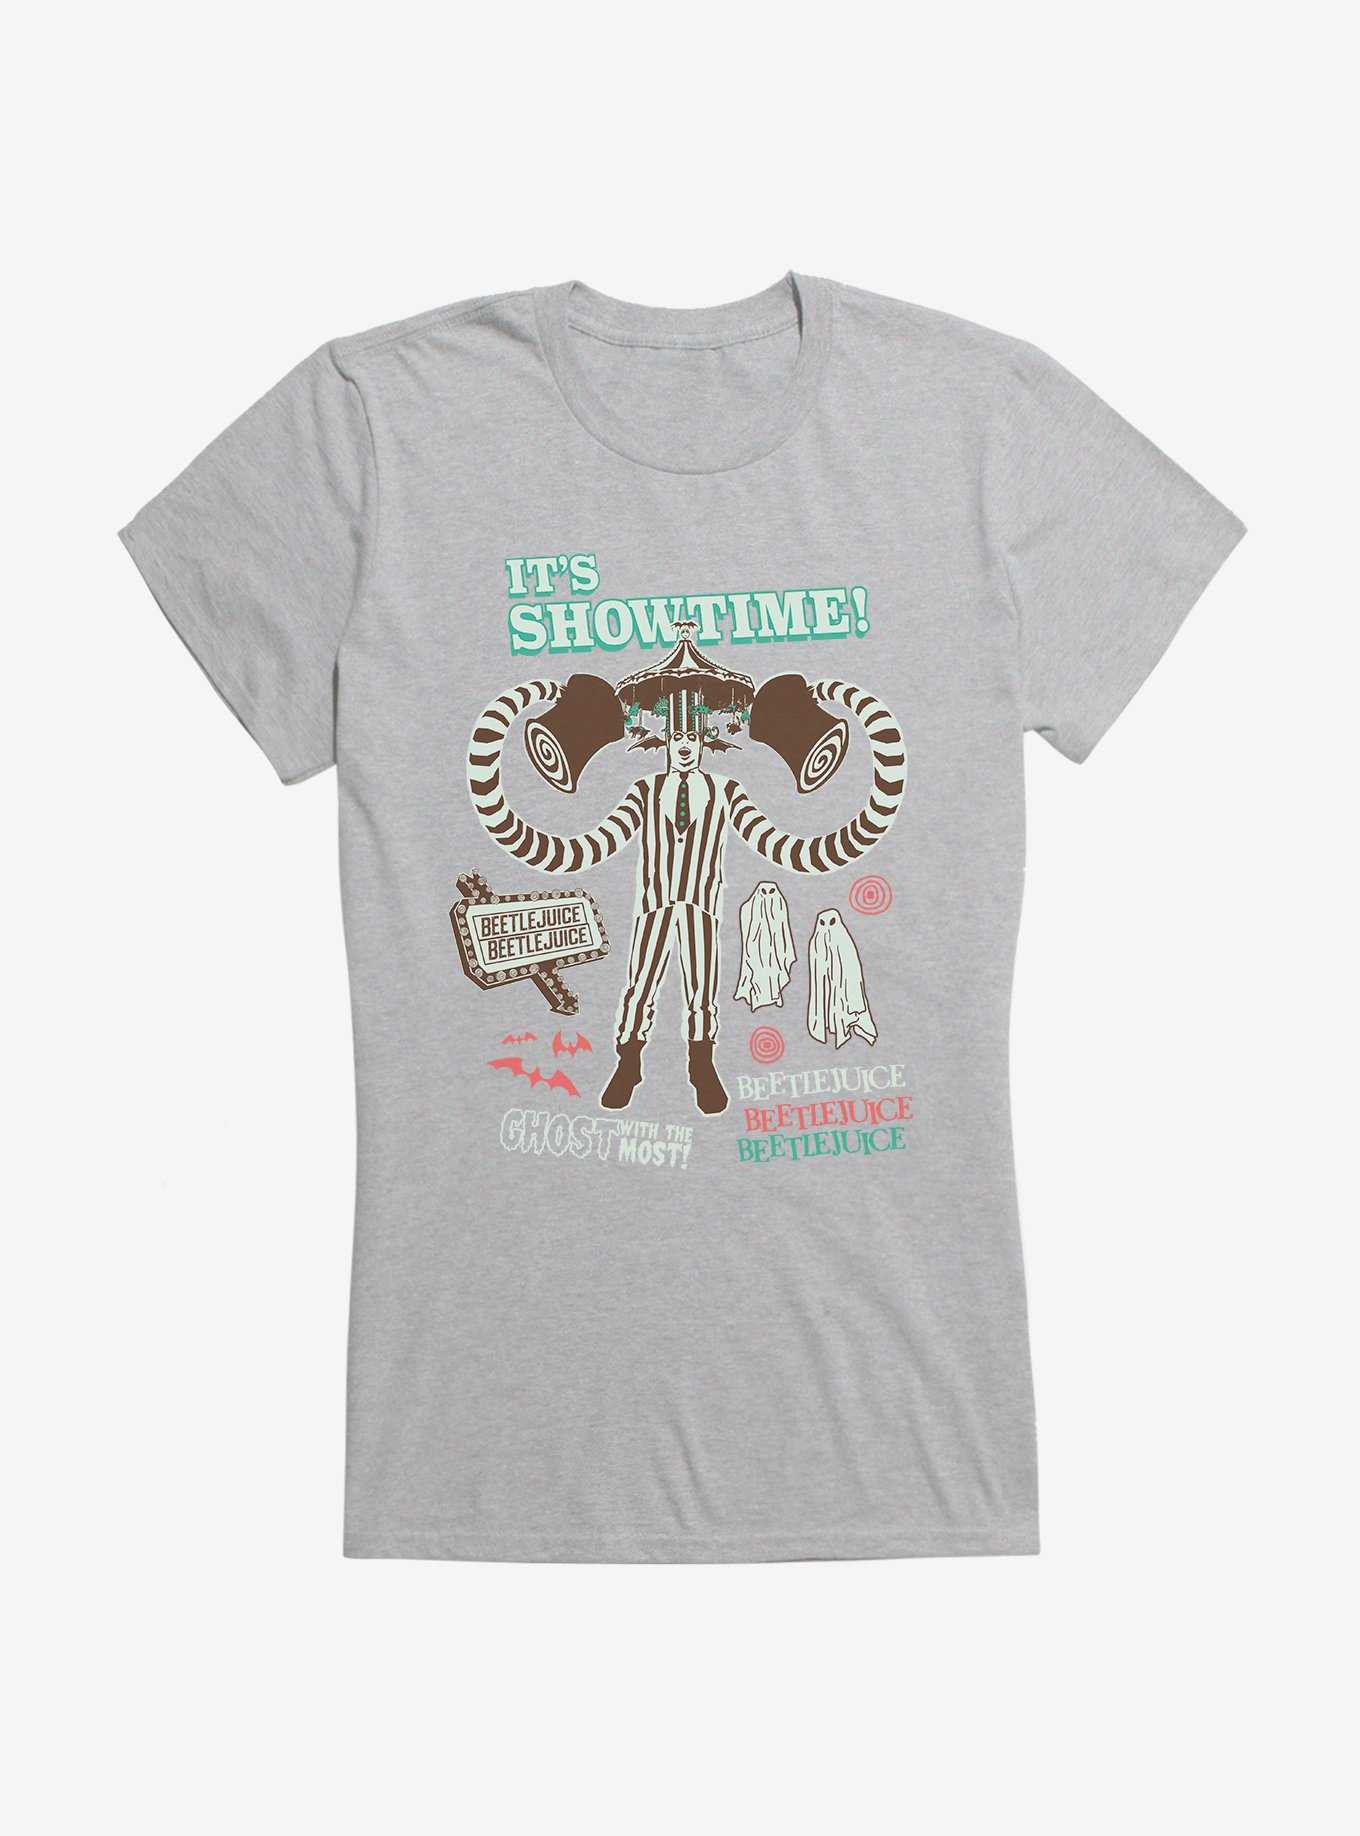 Beetlejuice Ghost With The Most! Girls T-Shirt, HEATHER, hi-res